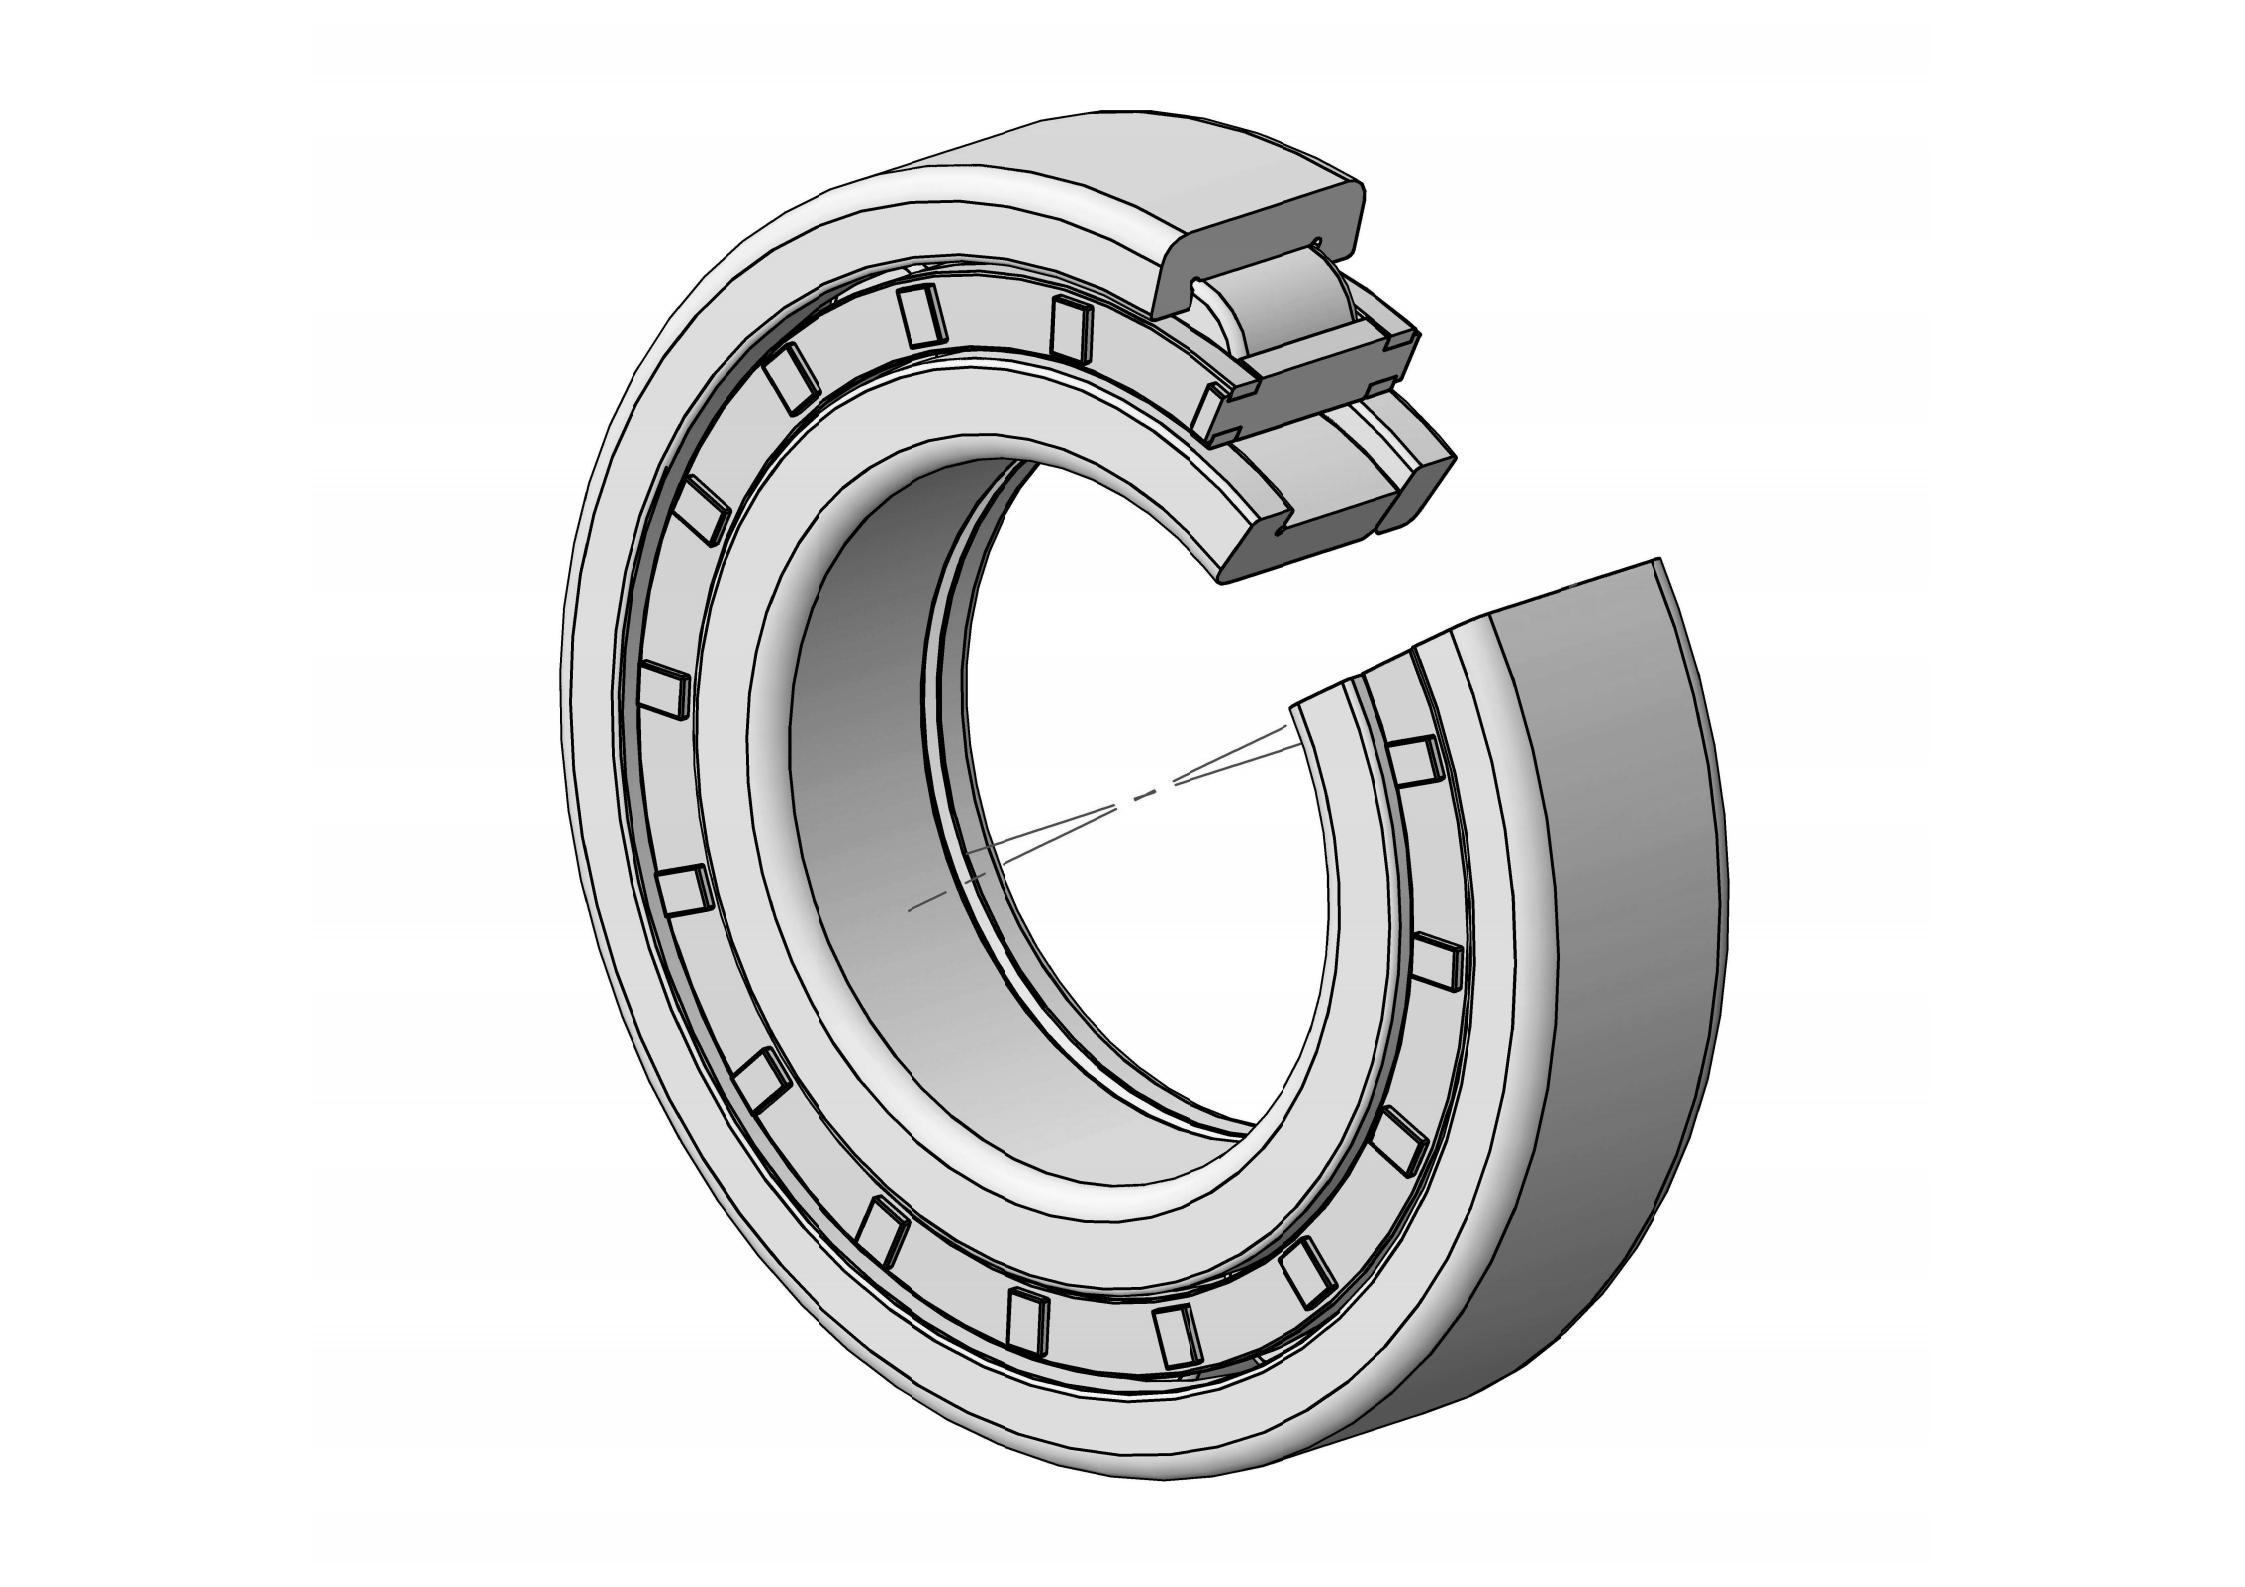  NUP2330-EM Single Row Cylindrical roller bearing 